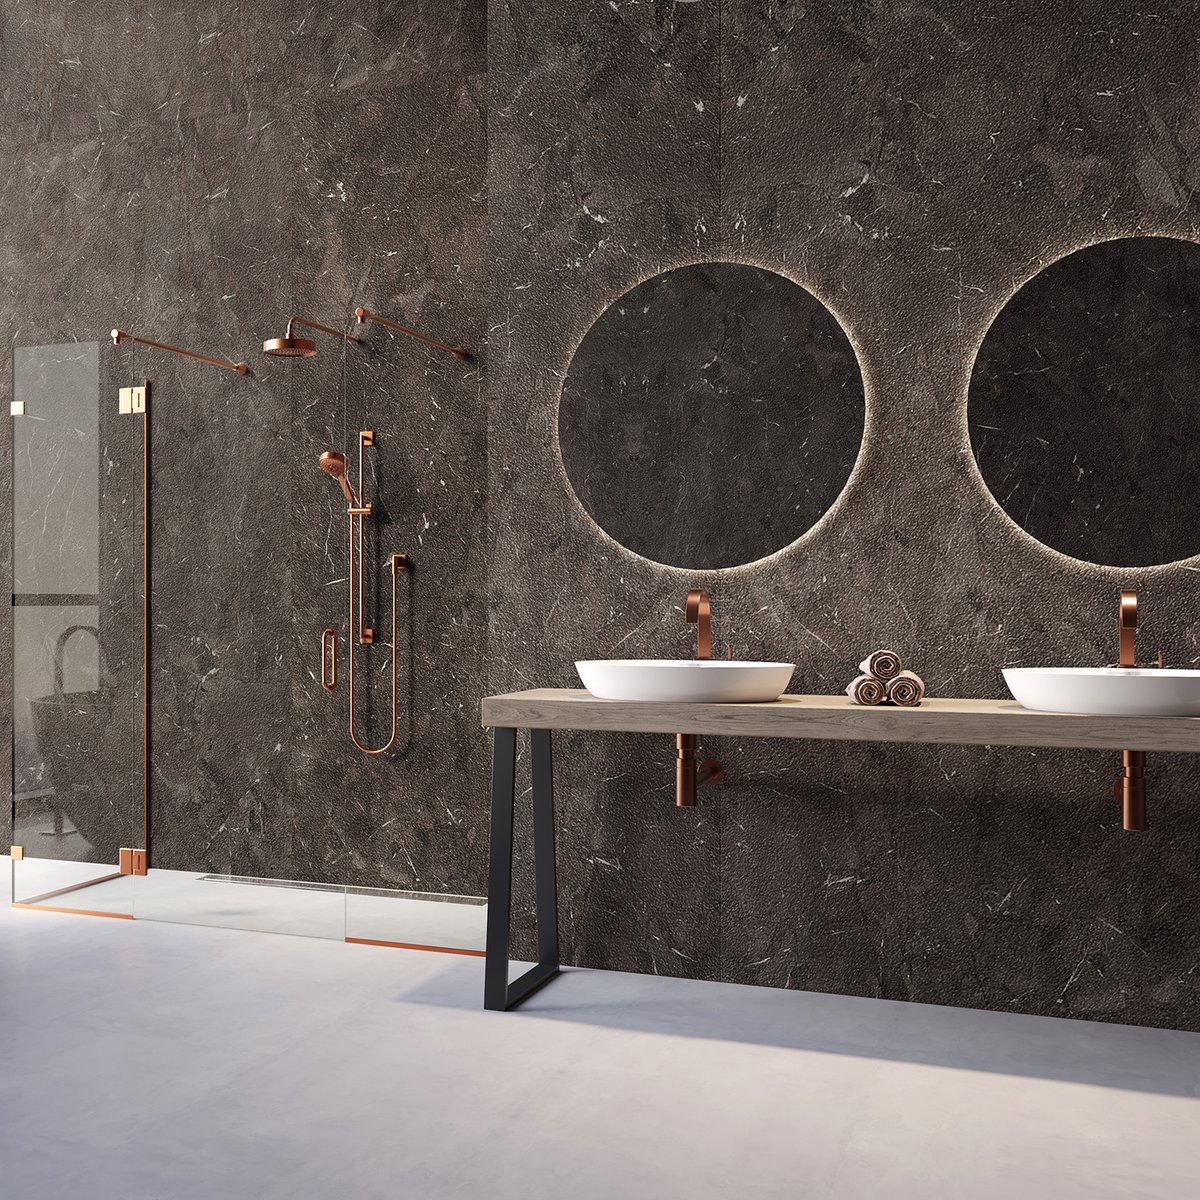 Inalco MDi is a non-porous material that is highly scratch and stain resistant, so it will stay looking its very best with minimal maintenance and after care – an important quality when used over large and visible areas of the bathroom. Pictured: Umbra Marron wall cladding